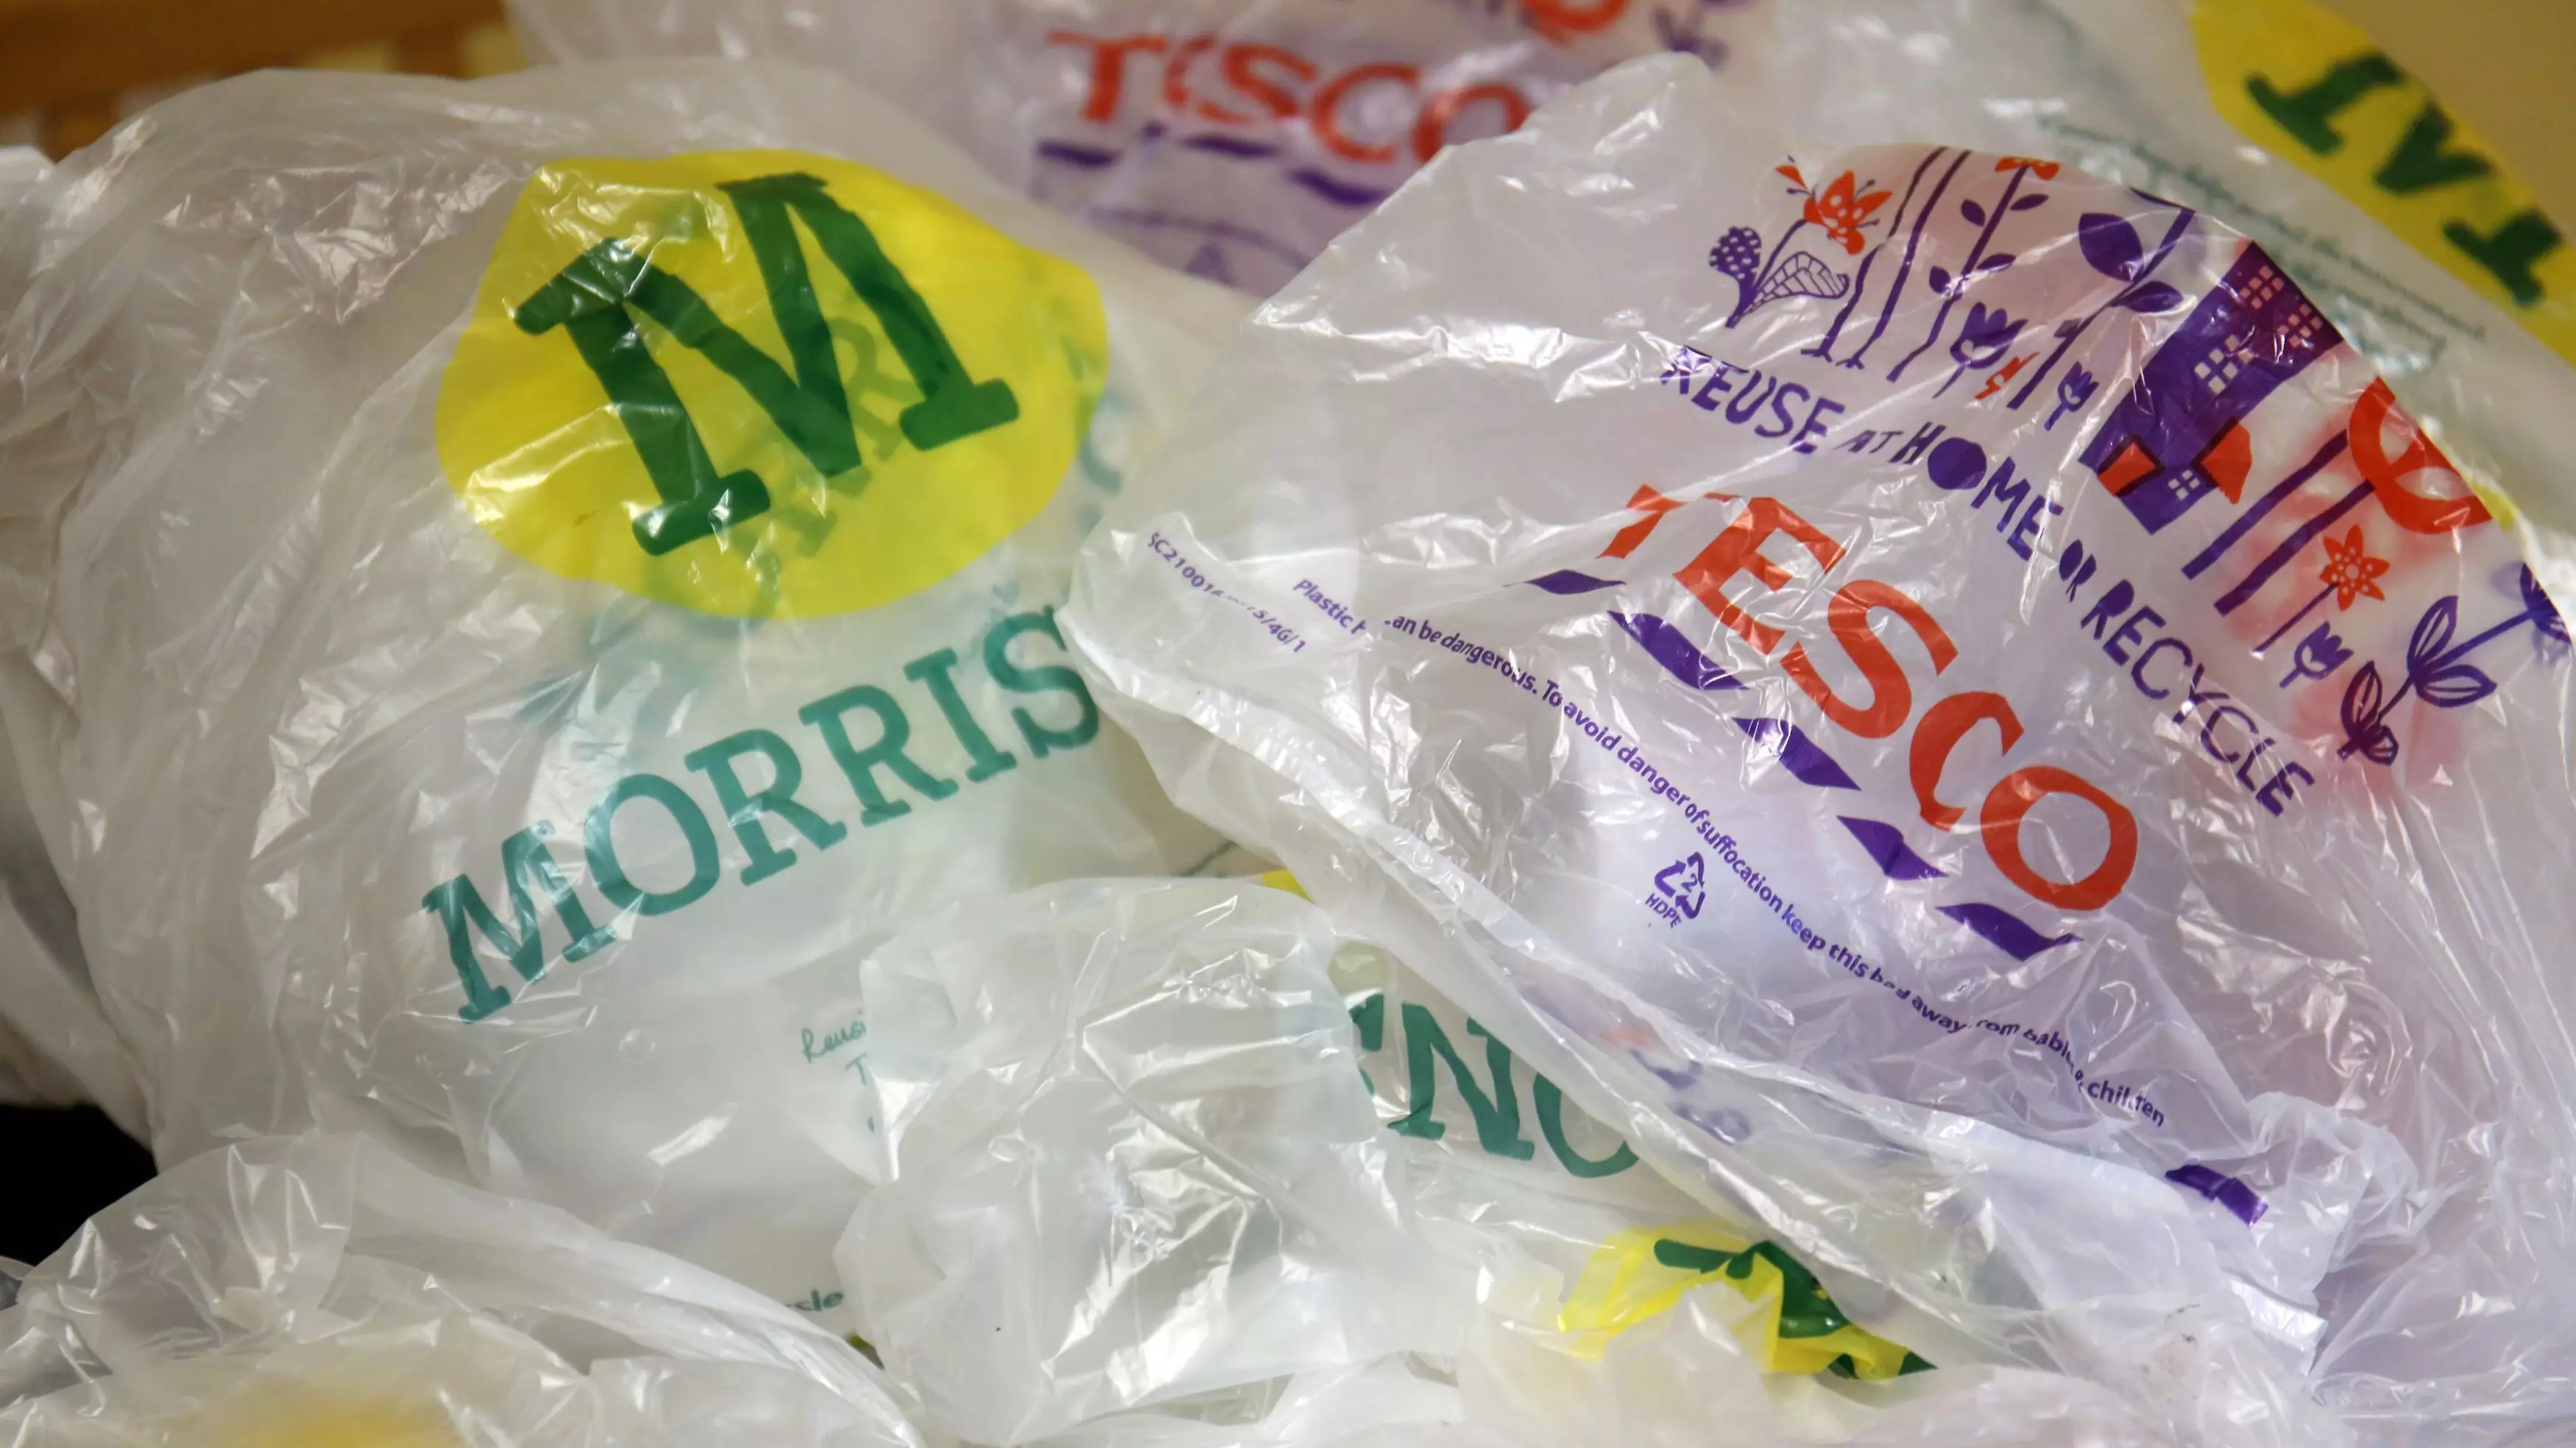 Morrisons & Tesco Have Agreed To Stop Using 5p Plastic Bags By The End Of 2018